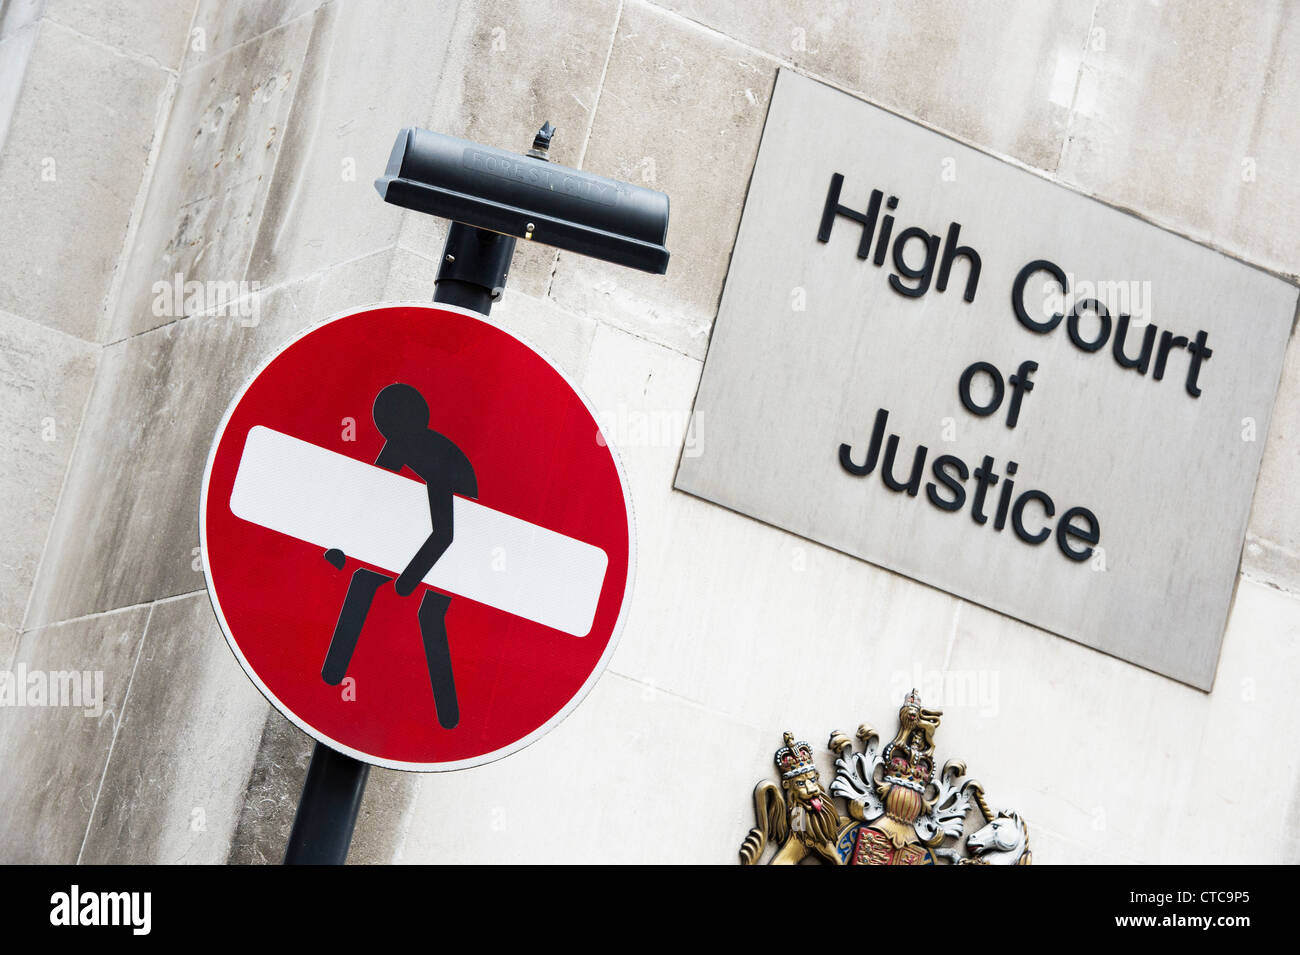 Street art Graffiti No Entry sign in front of High Court of Justice Stock Photo